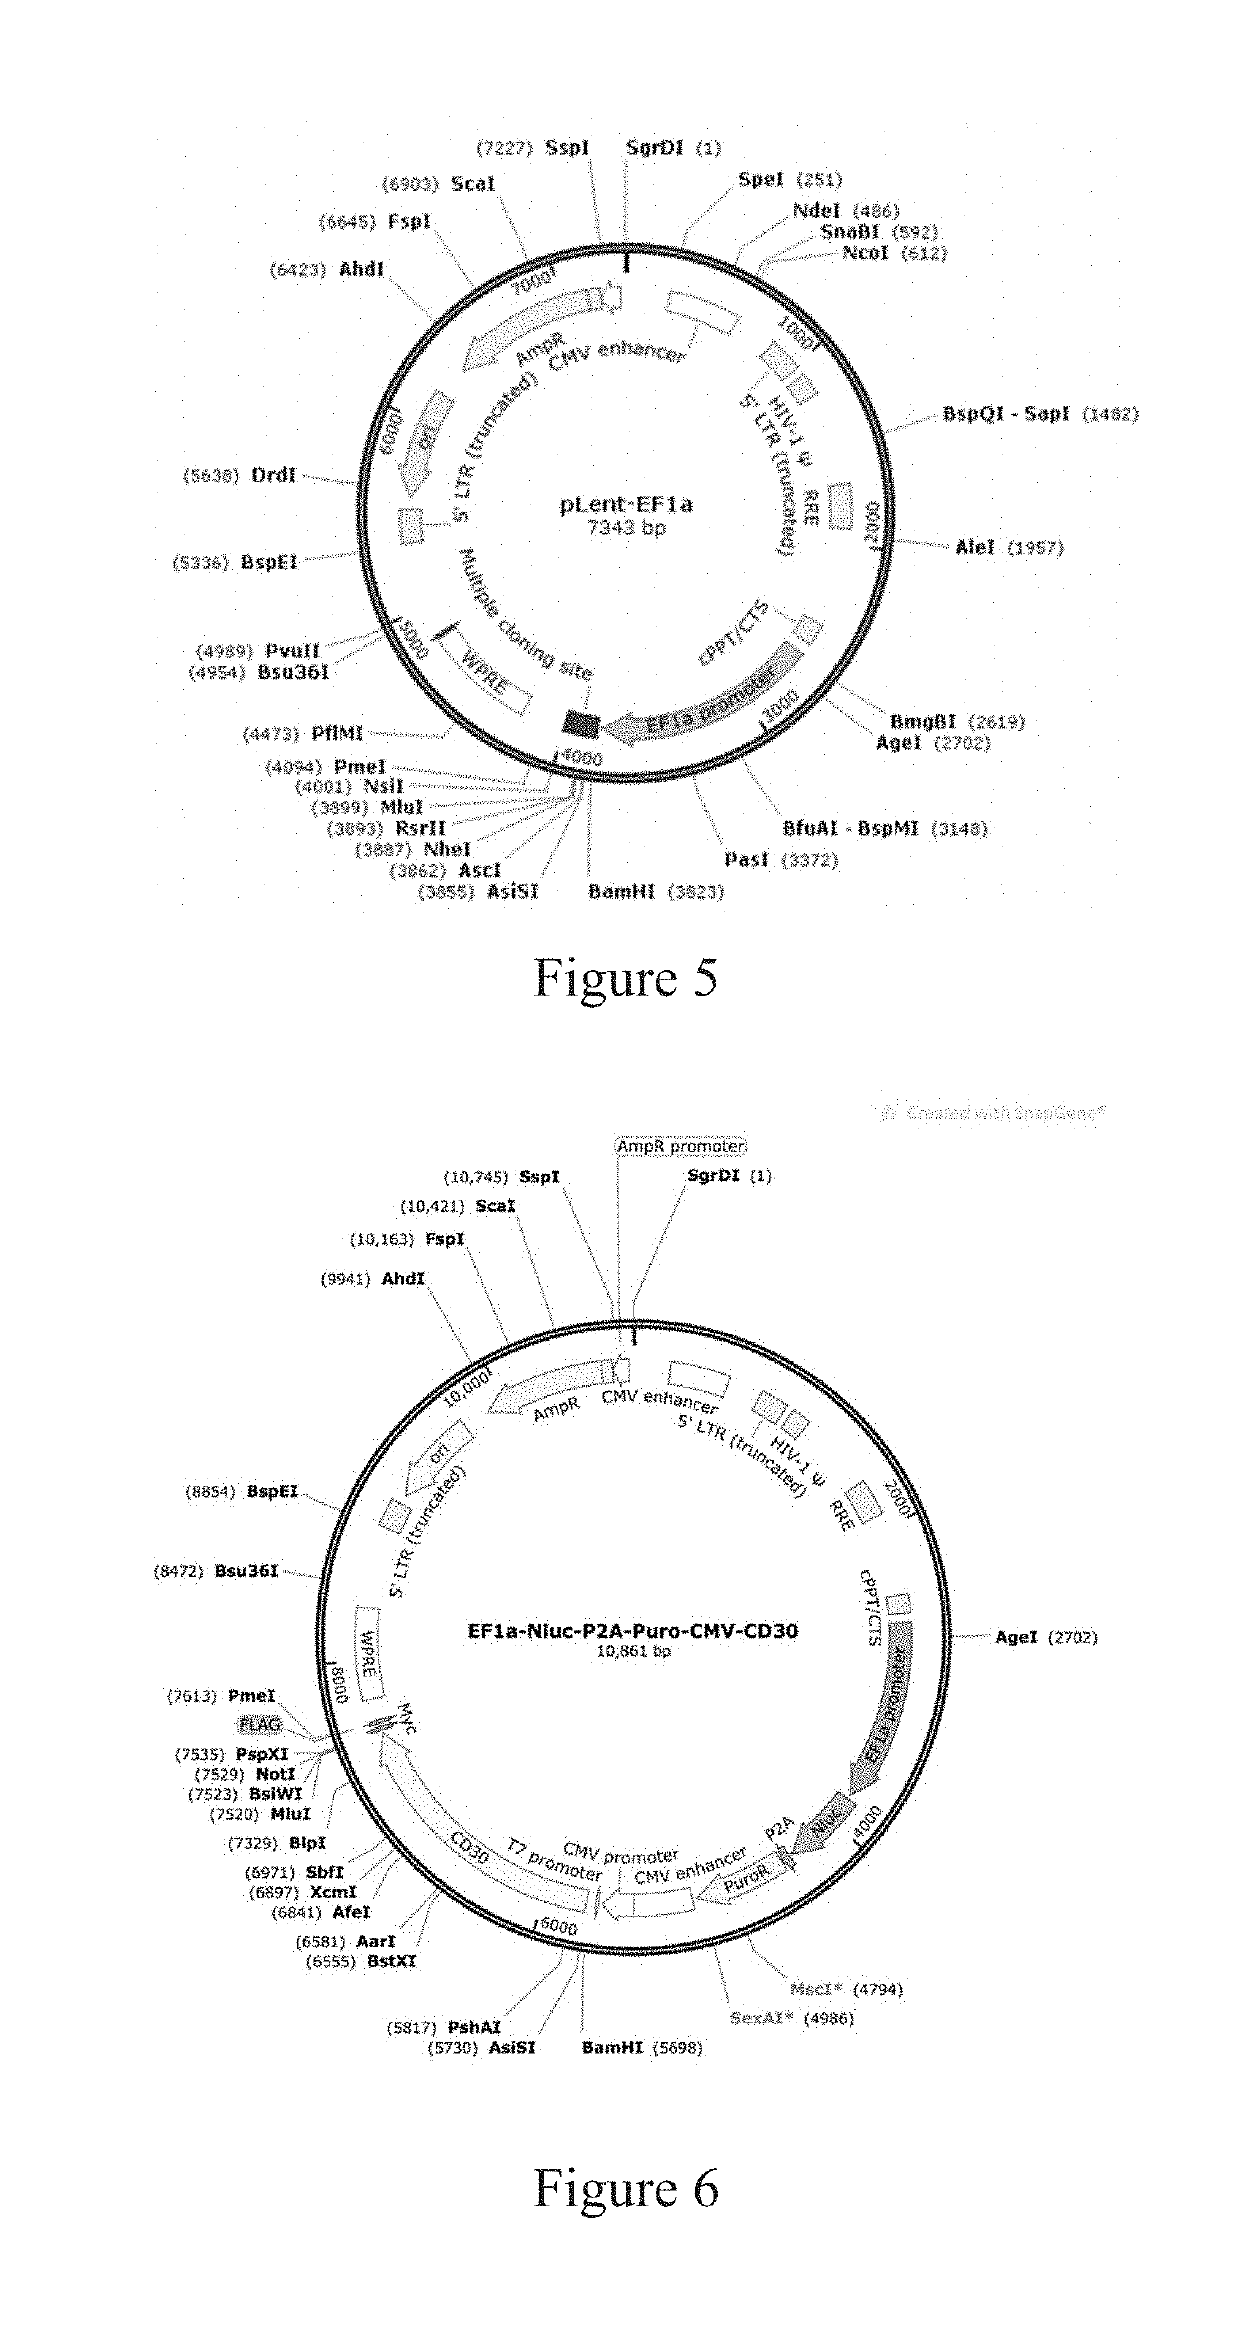 Recombinant chimeric antigen receptor gene and use thereof